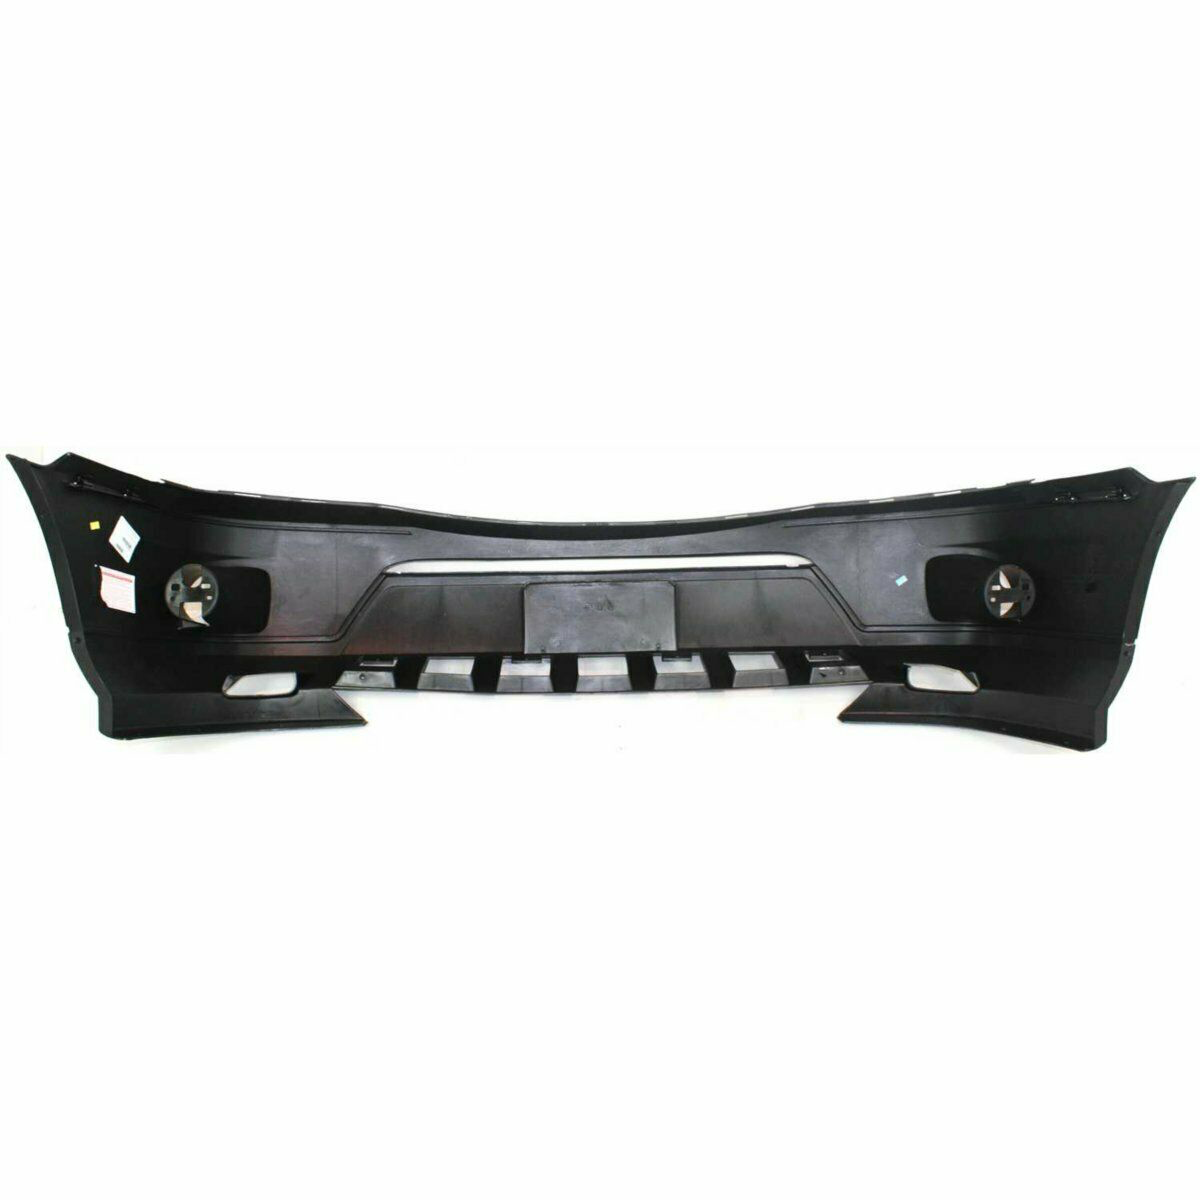 2002-2007 Buick Rendezvous Front Bumper Painted to Match